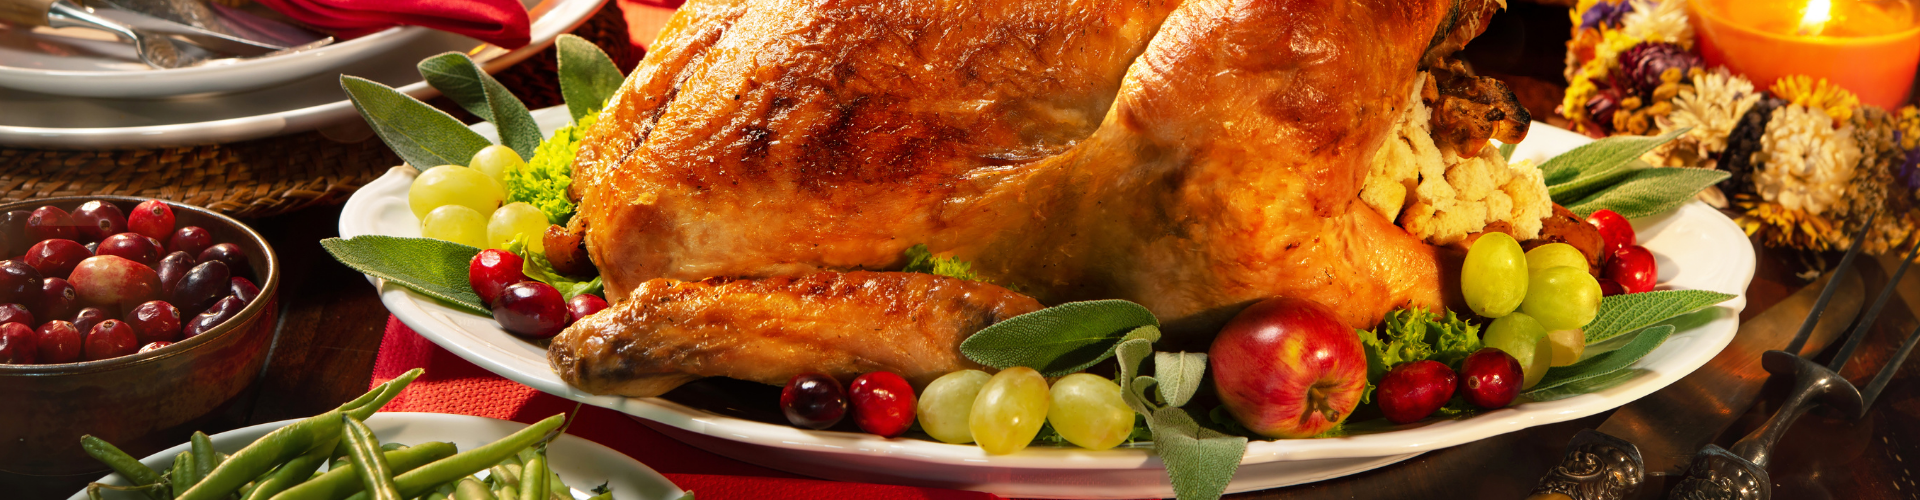 Pass the Turkey, Not the Gas! Avoid Indigestion and Acid Reflux